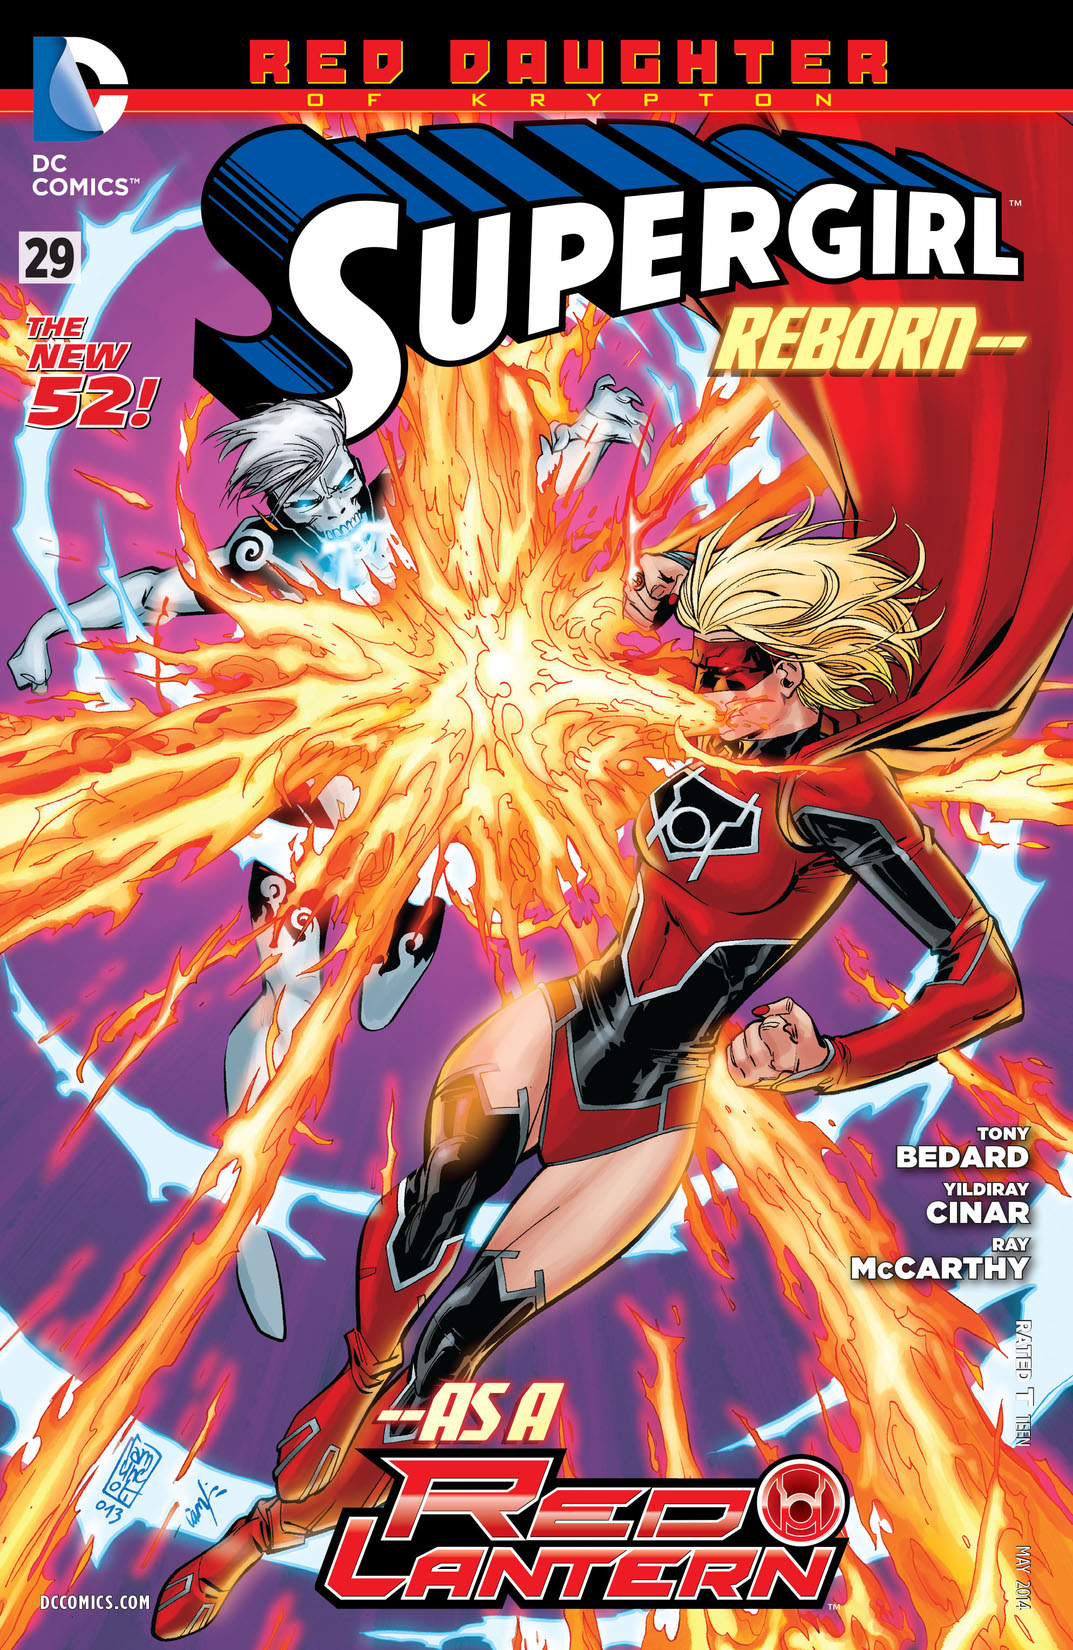 Supergirl (2011-) #29 preview images